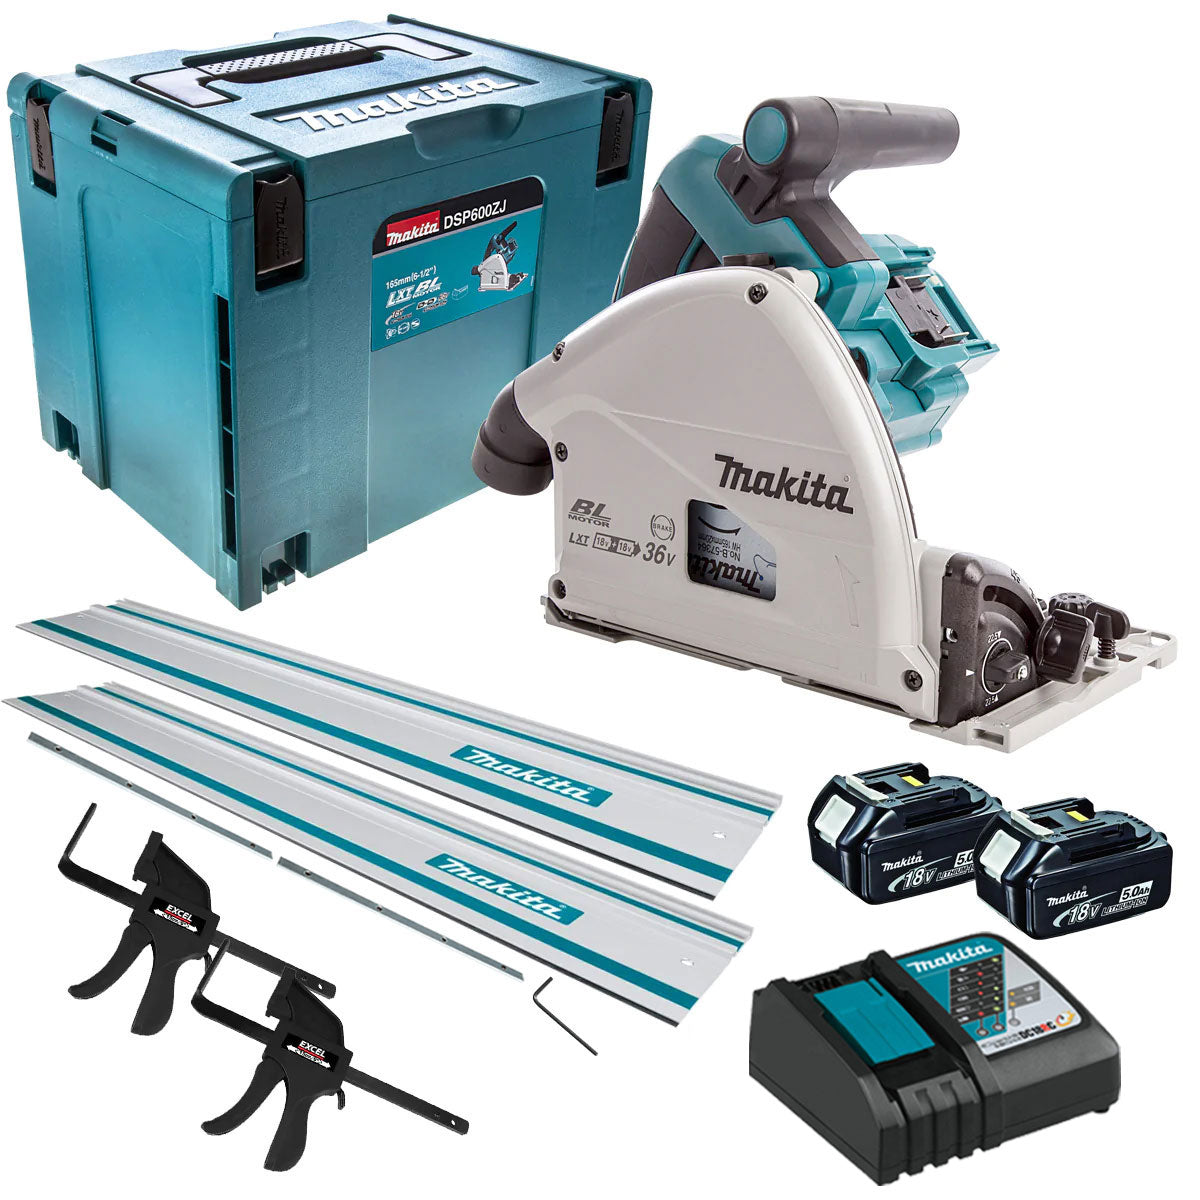 Makita DSP600TJ 36V Brushless Plunge Saw 2 x 5.0Ah Batteries & Accessories Set